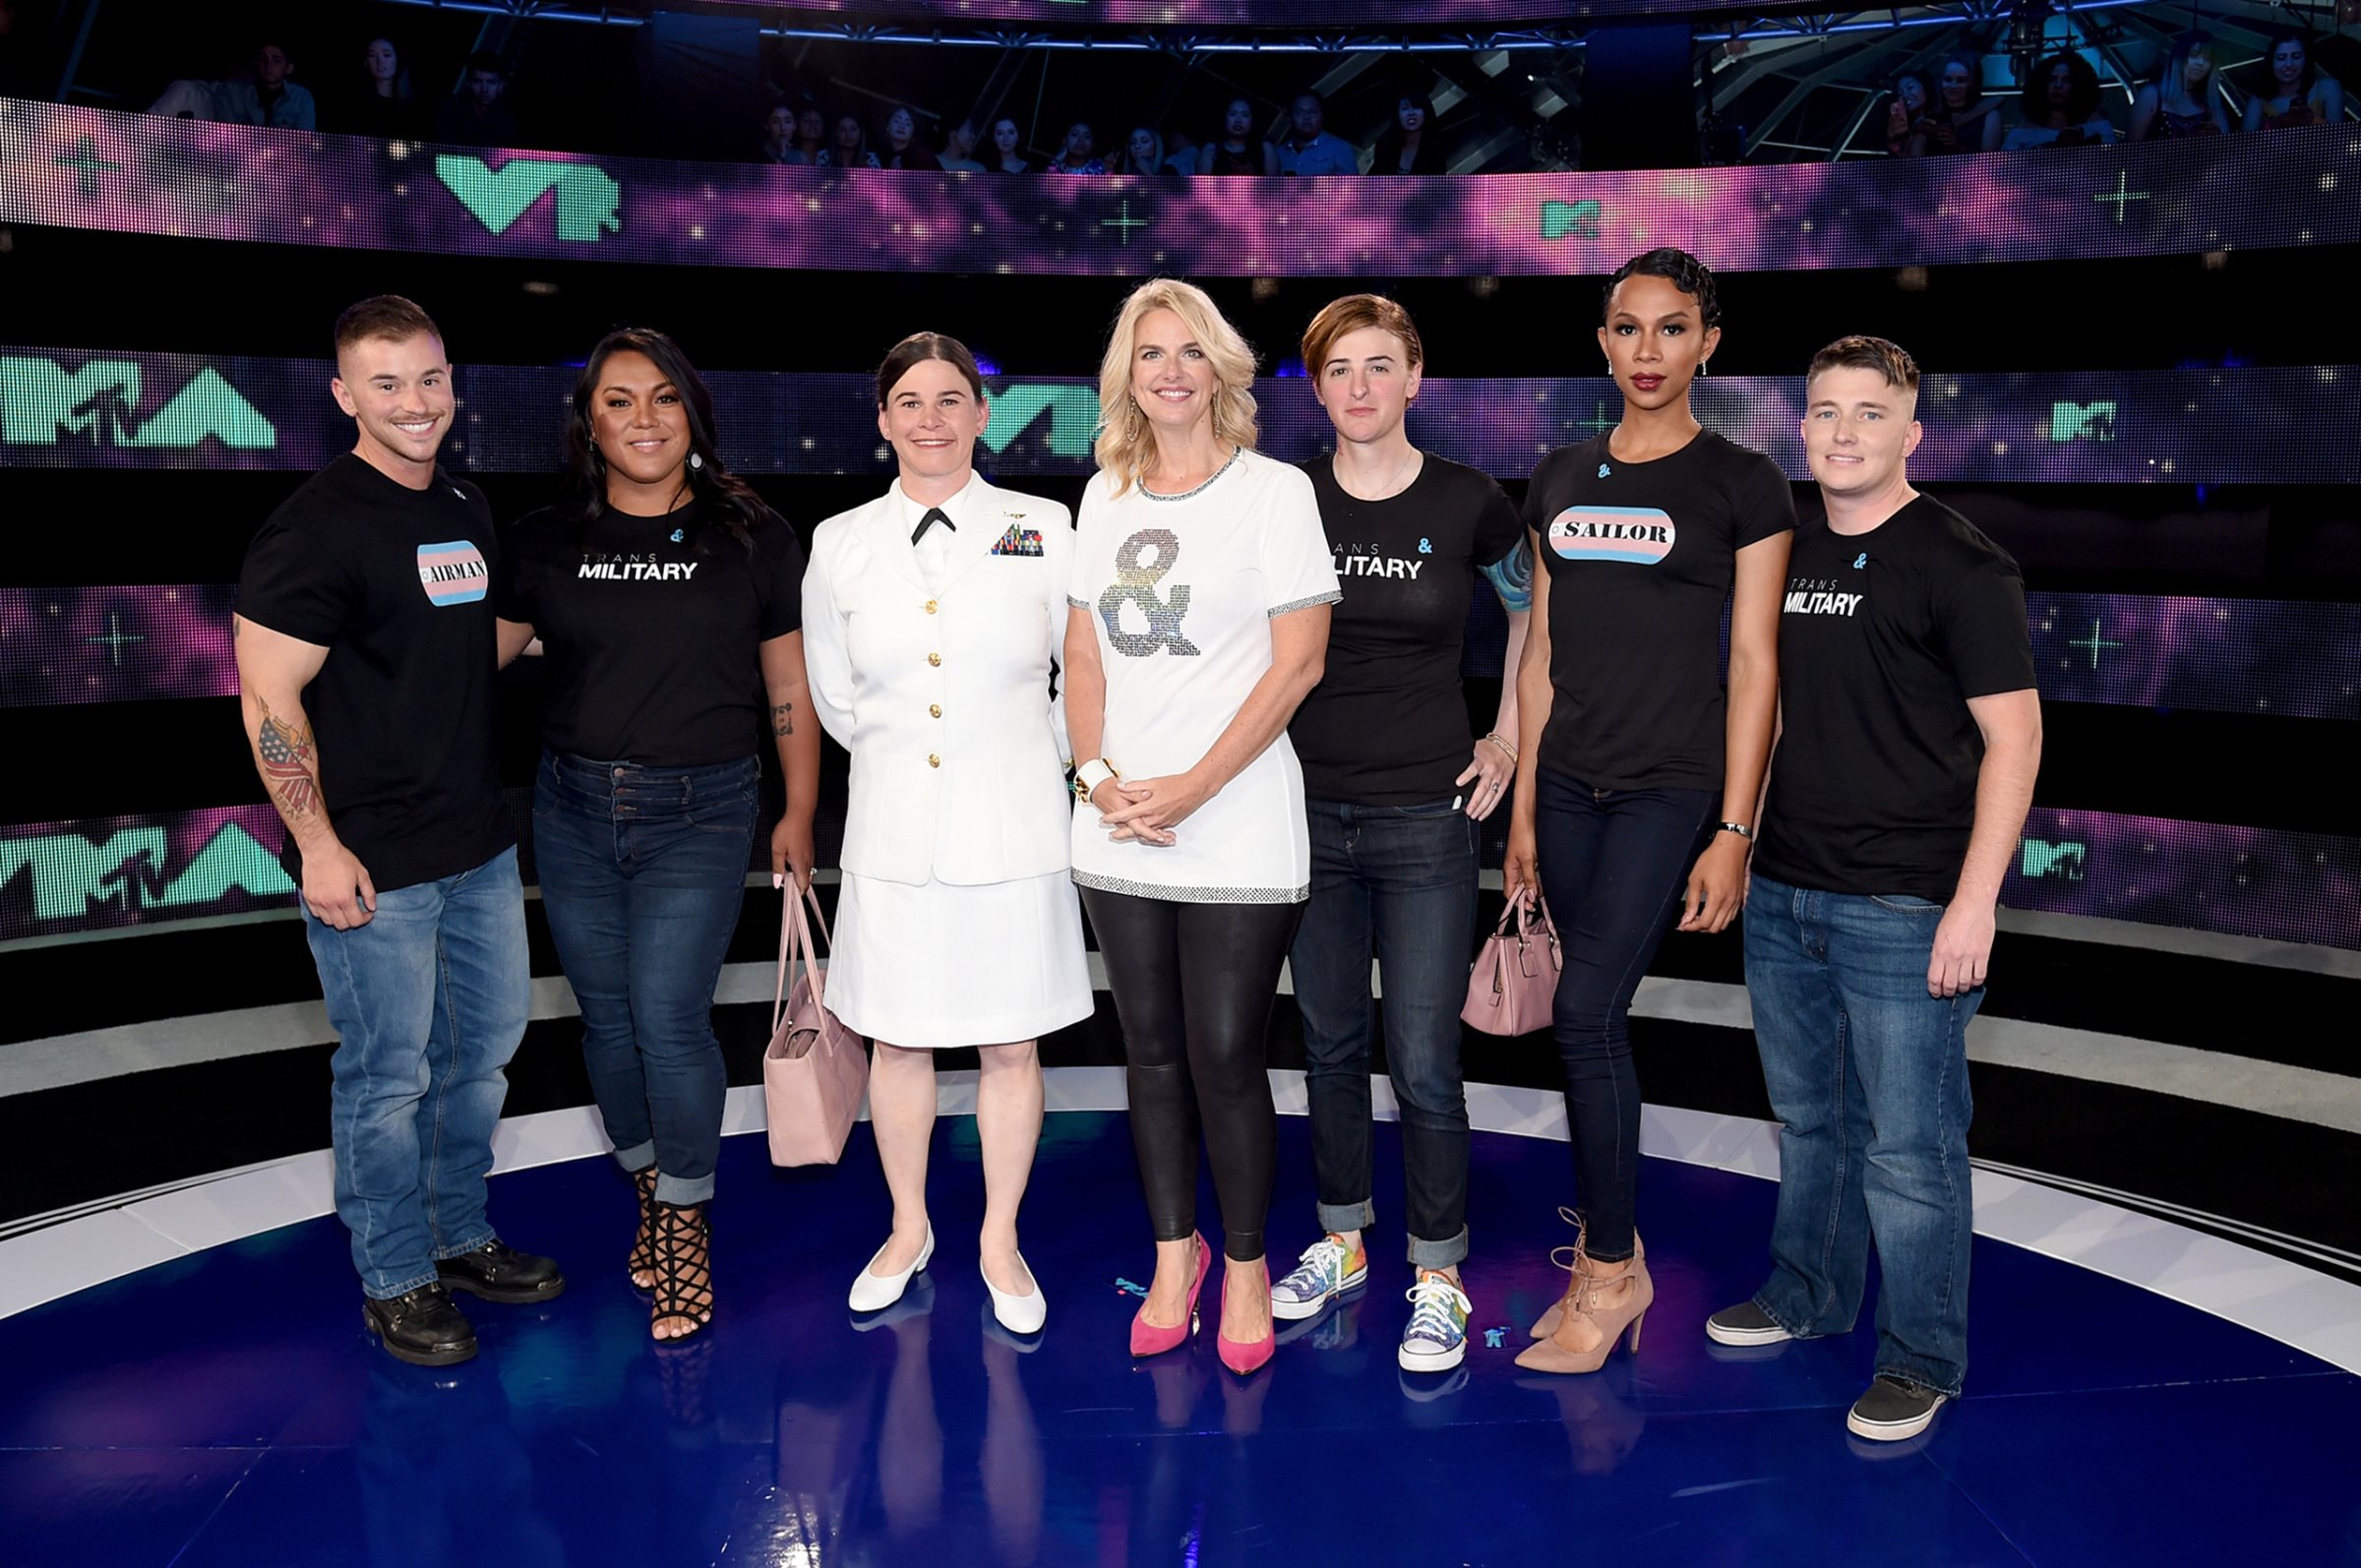 President of GLAAD Sarah Kate Ellis and transgender military members attend the 2017 MTV Video Music Awards at The Forum on Aug. 27, 2017 in Inglewood, California.